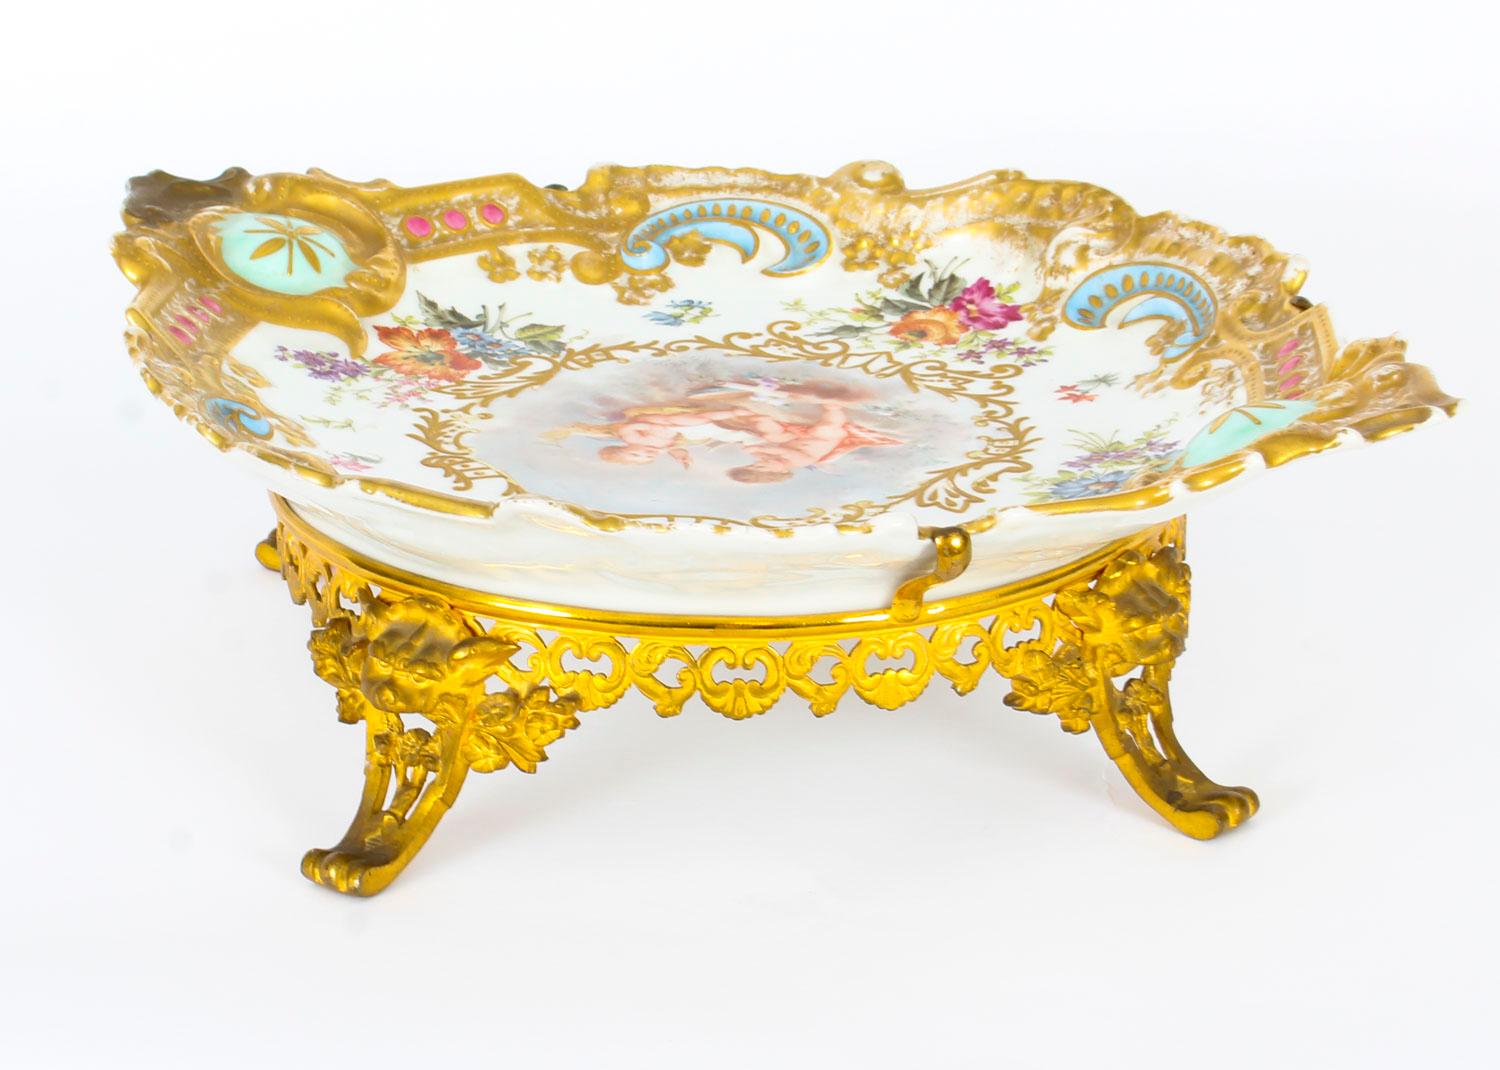 Antique French Porcelain & Ormolu Mounted Centerpiece, Mid-19th Century 4